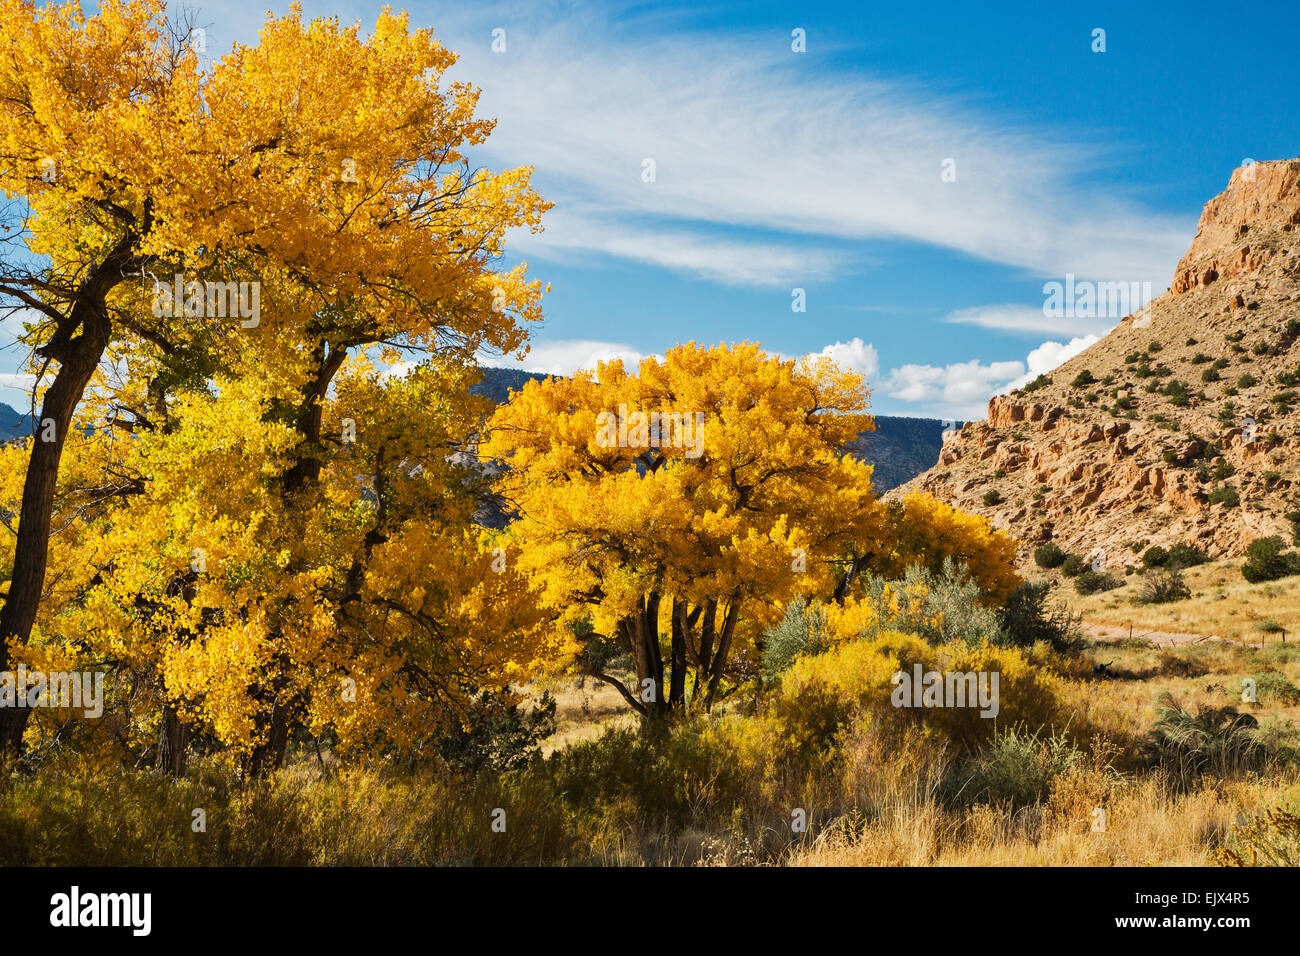 Cottonwood treess on the Chama River near the village of Abiquiu in northern New Mexico turn a brilliant golden yellow. Stock Photo